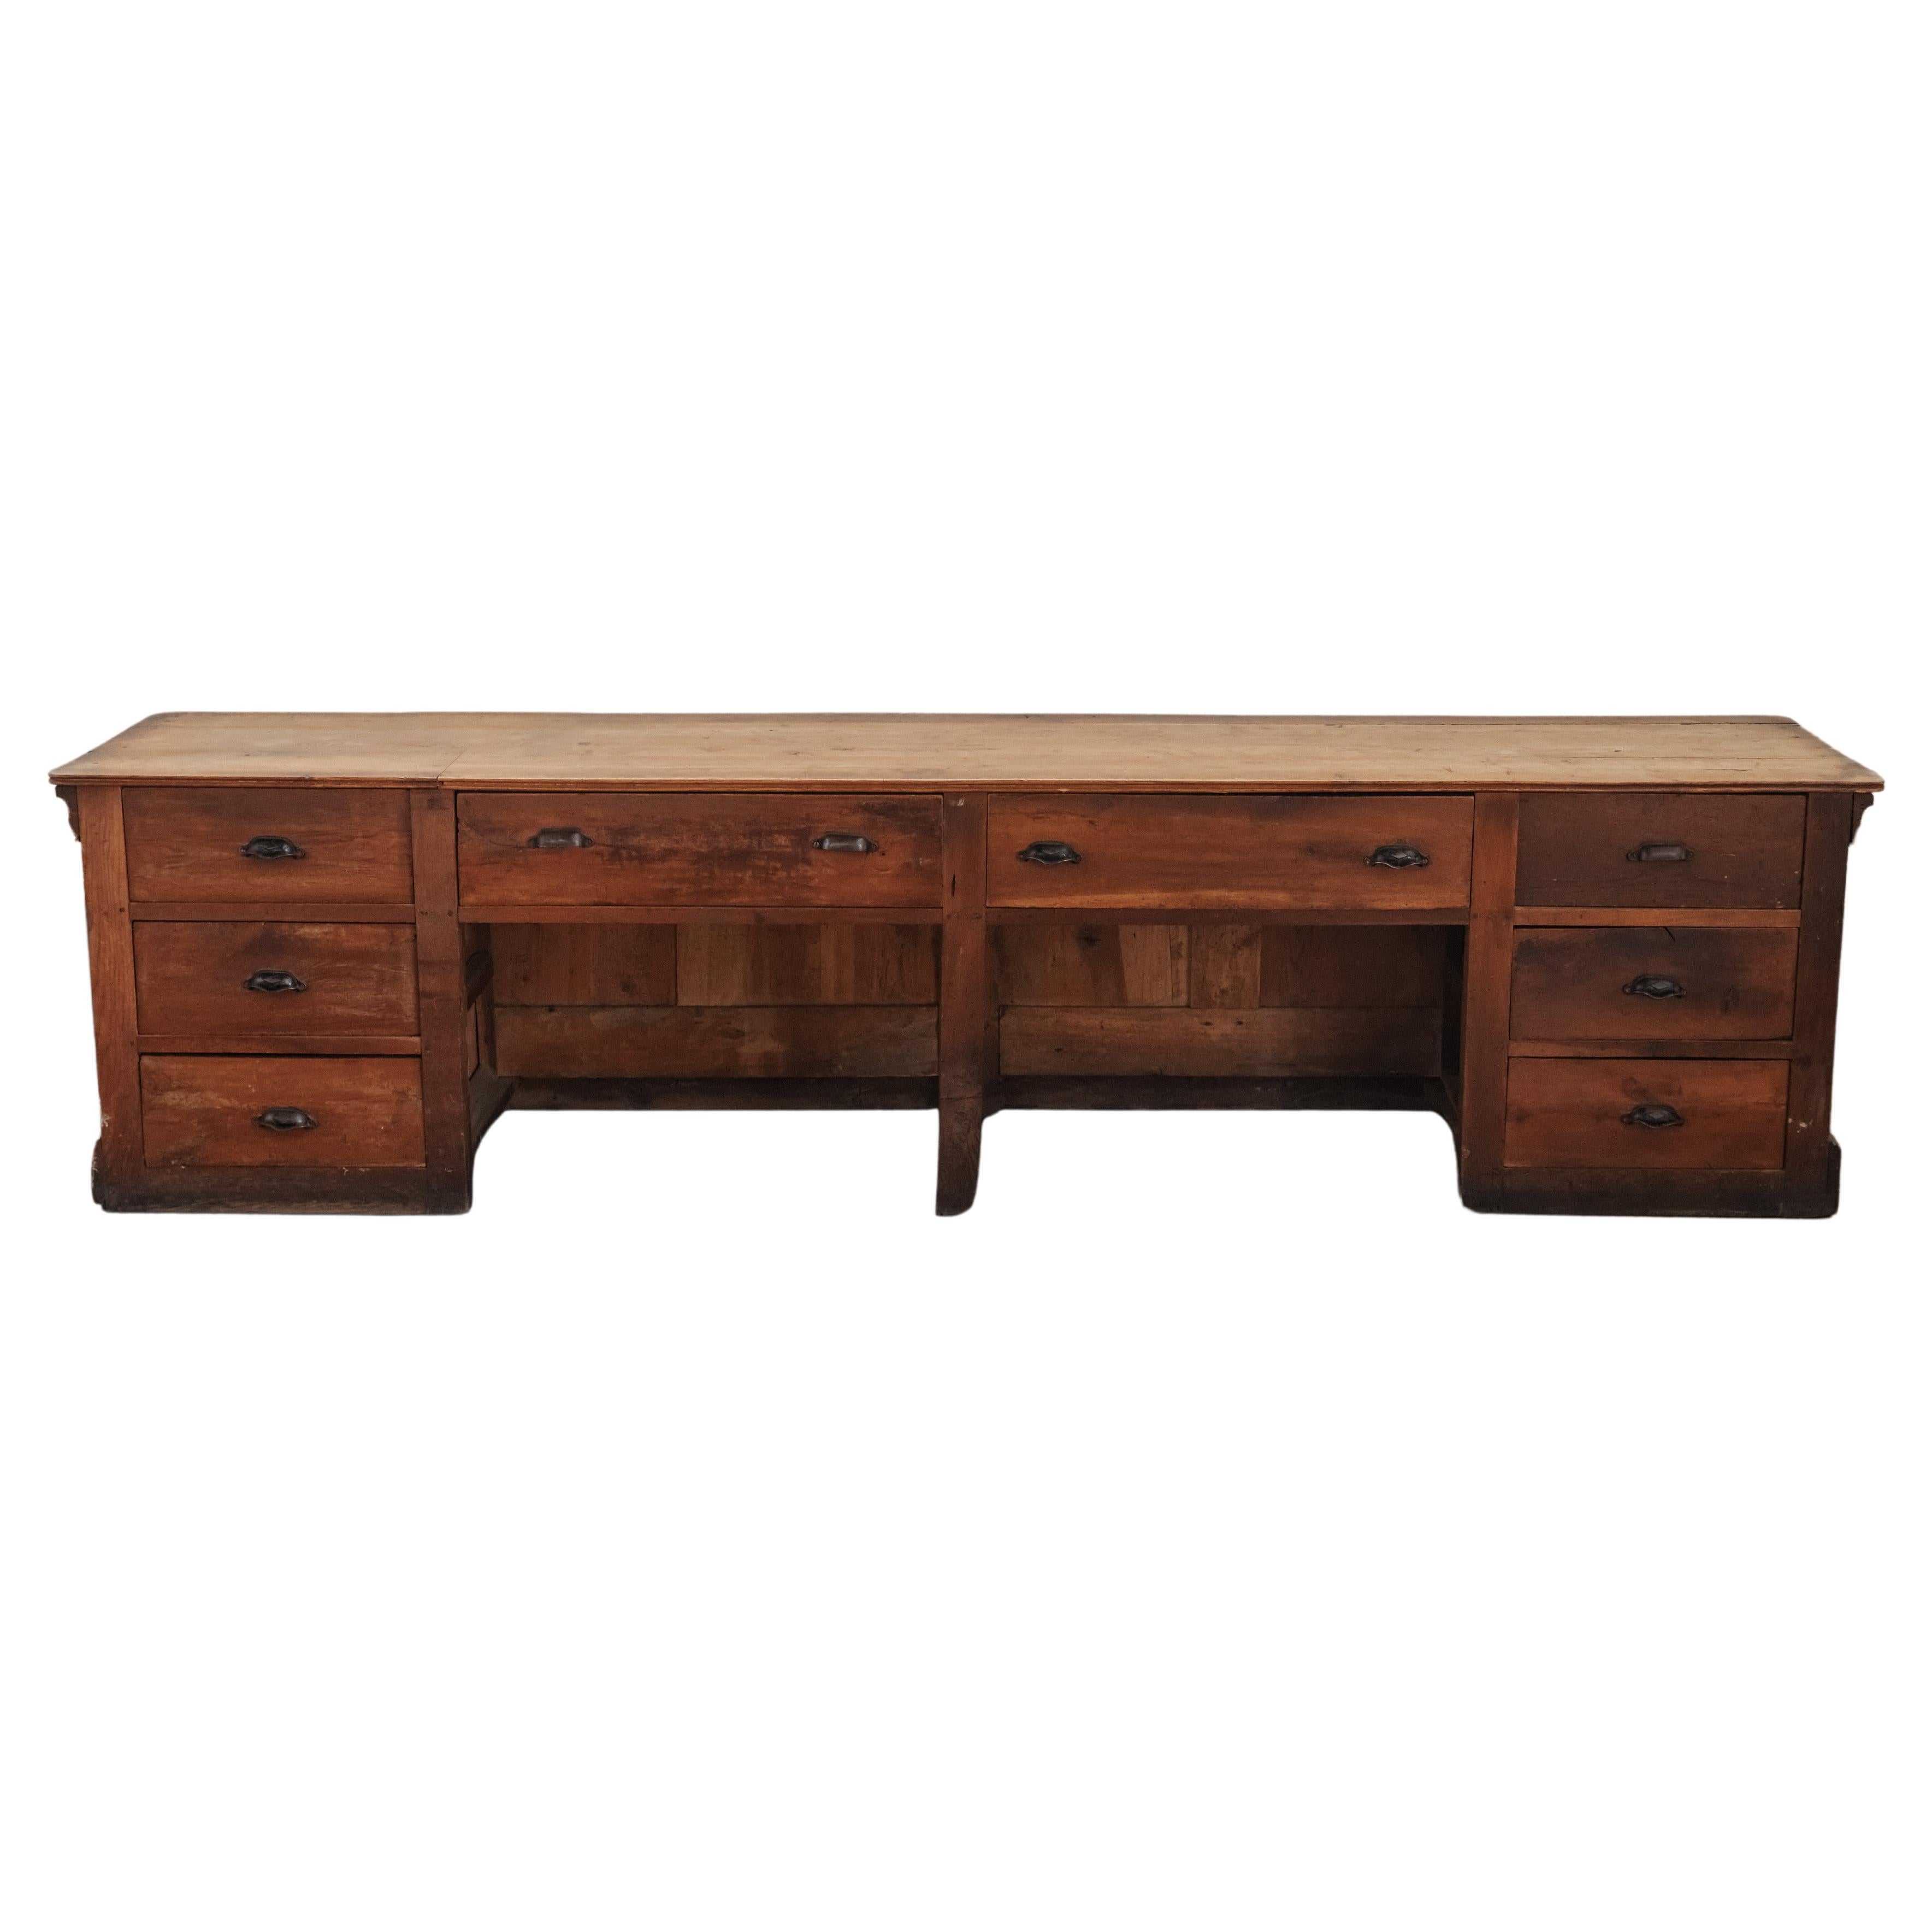 Early Oak Shop Counter From France, Circa 1940